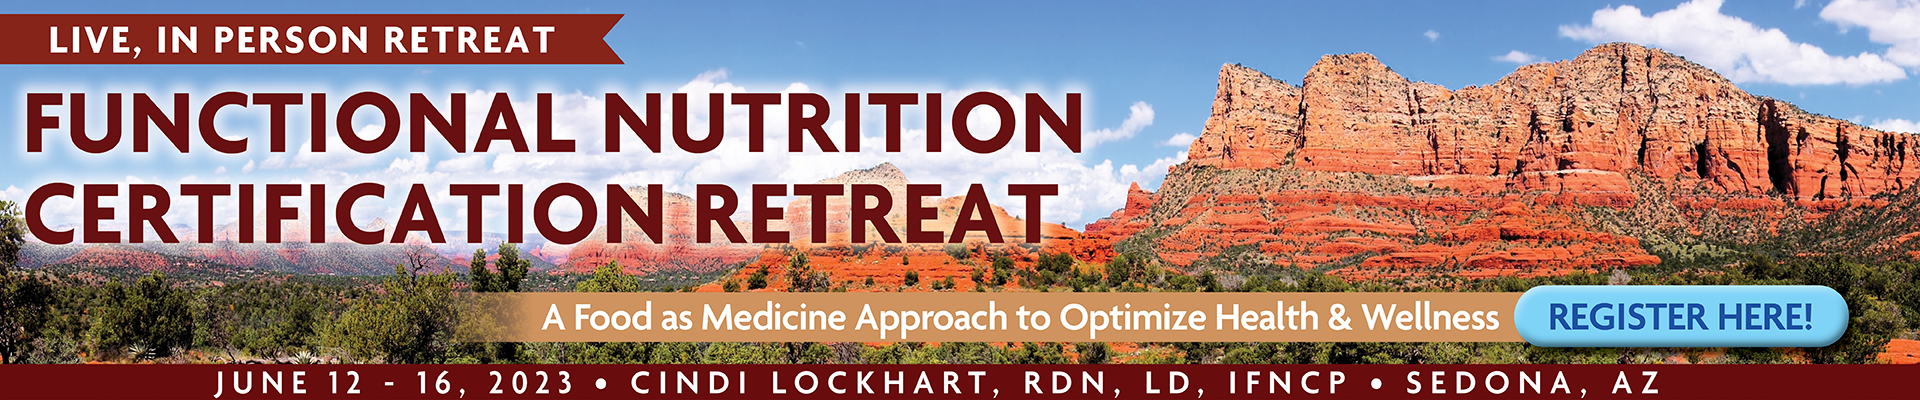 5-Day Retreat: Functional Nutrition Certification Retreat: A Food as Medicine Approach to Optimize Health & Wellness